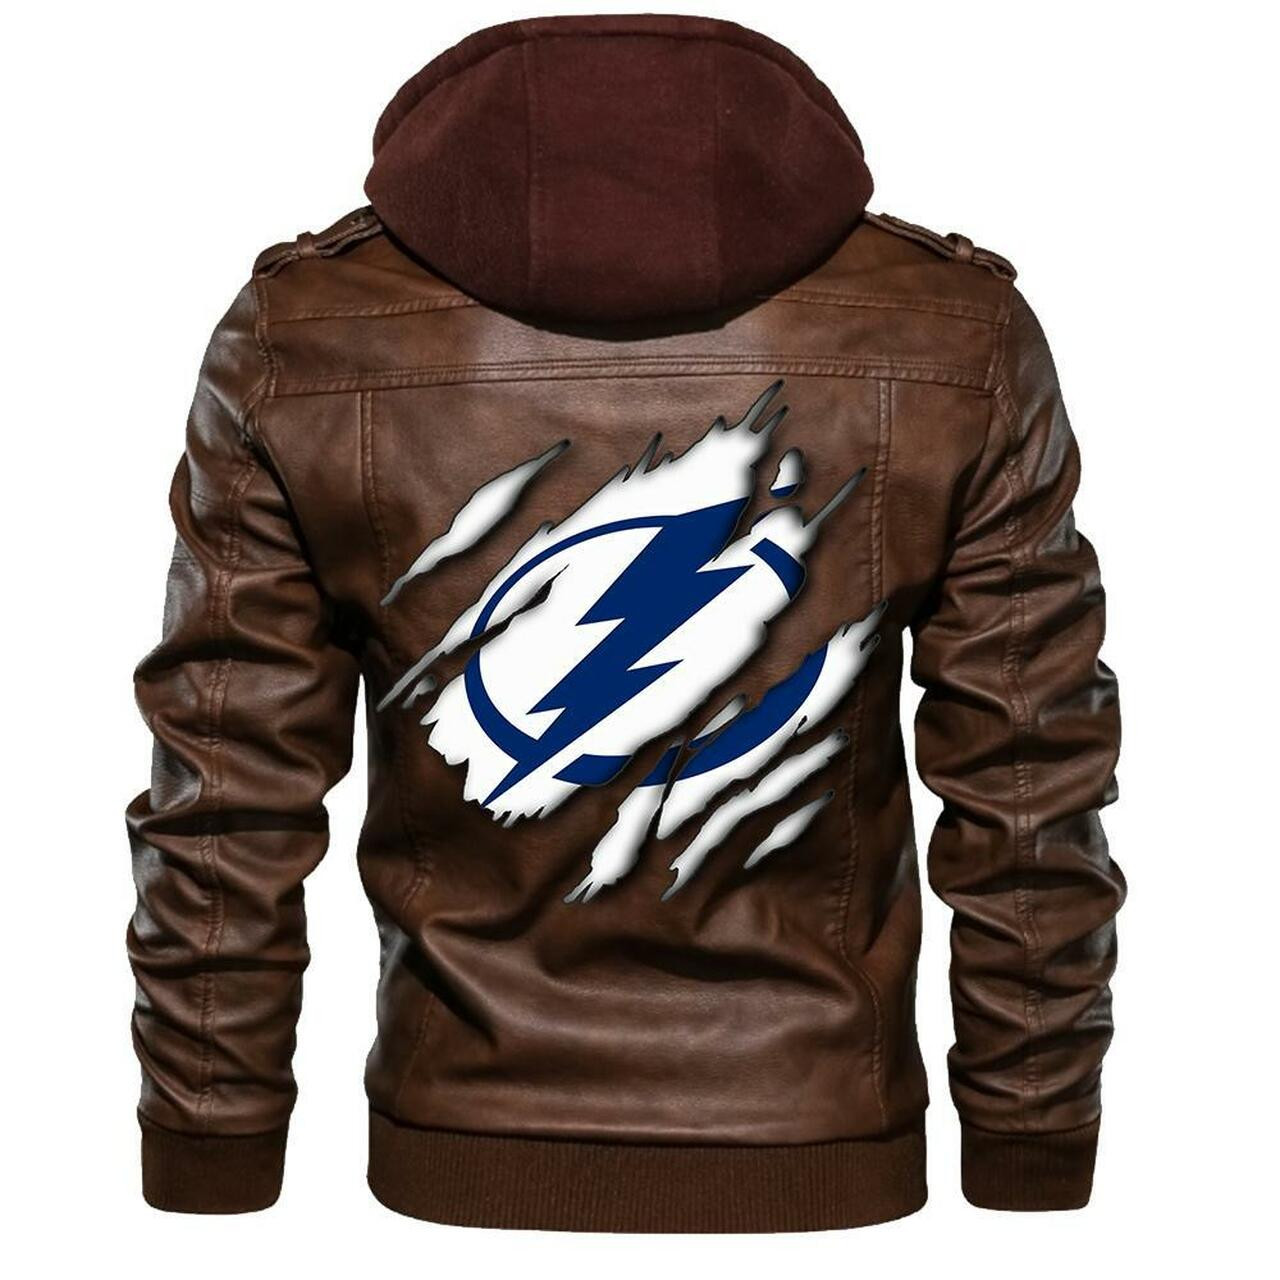 Check out and find the right leather jacket below 301